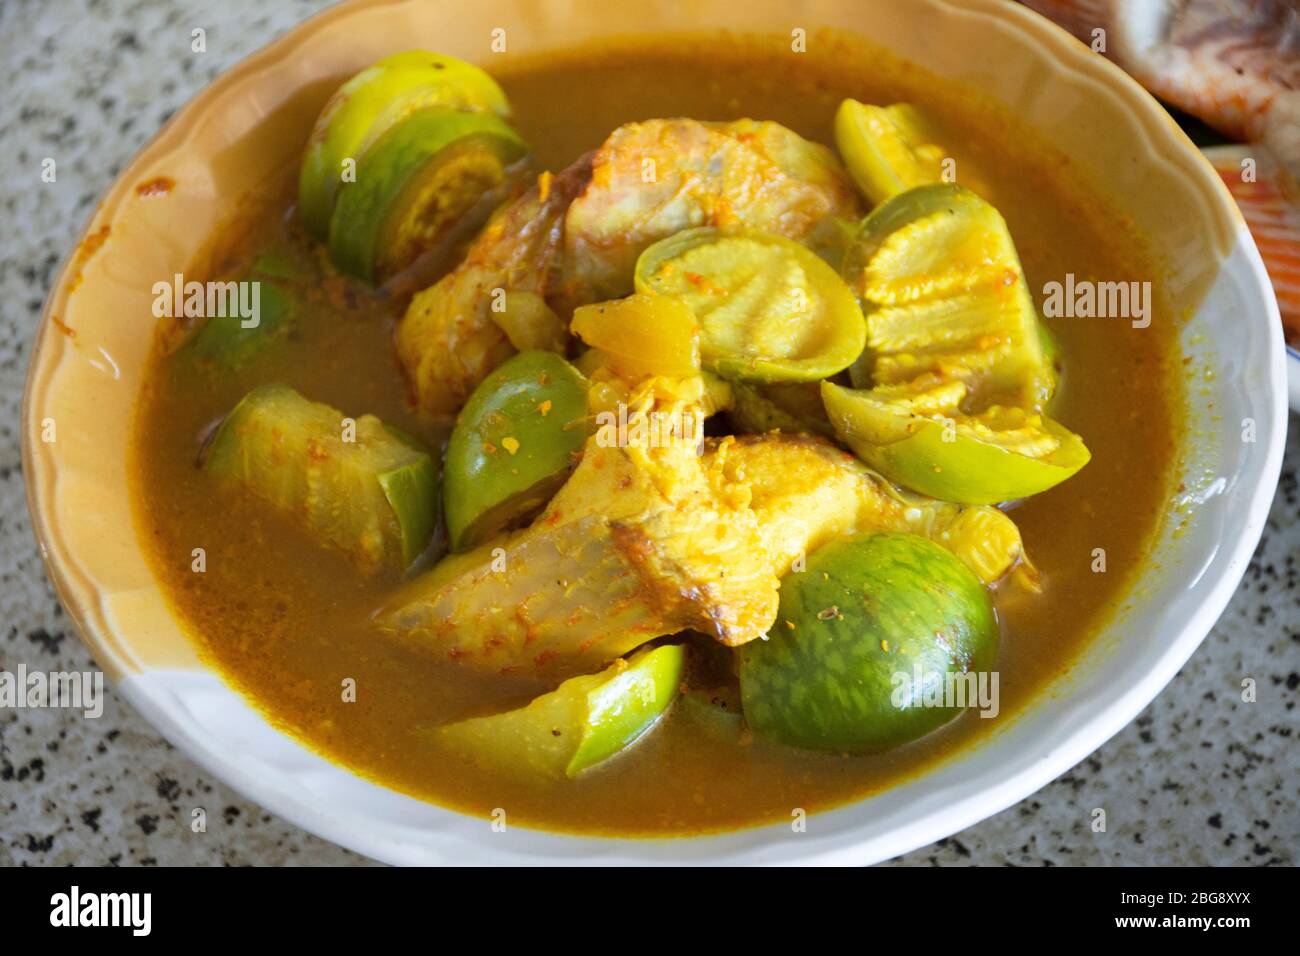 Thai Local Food Southern Style Spicy Sour Yellow Curry With Red Tilapia Fish And Green Eggplant In Bowl For Serve Lunch Meal To Family People At Count Stock Photo Alamy